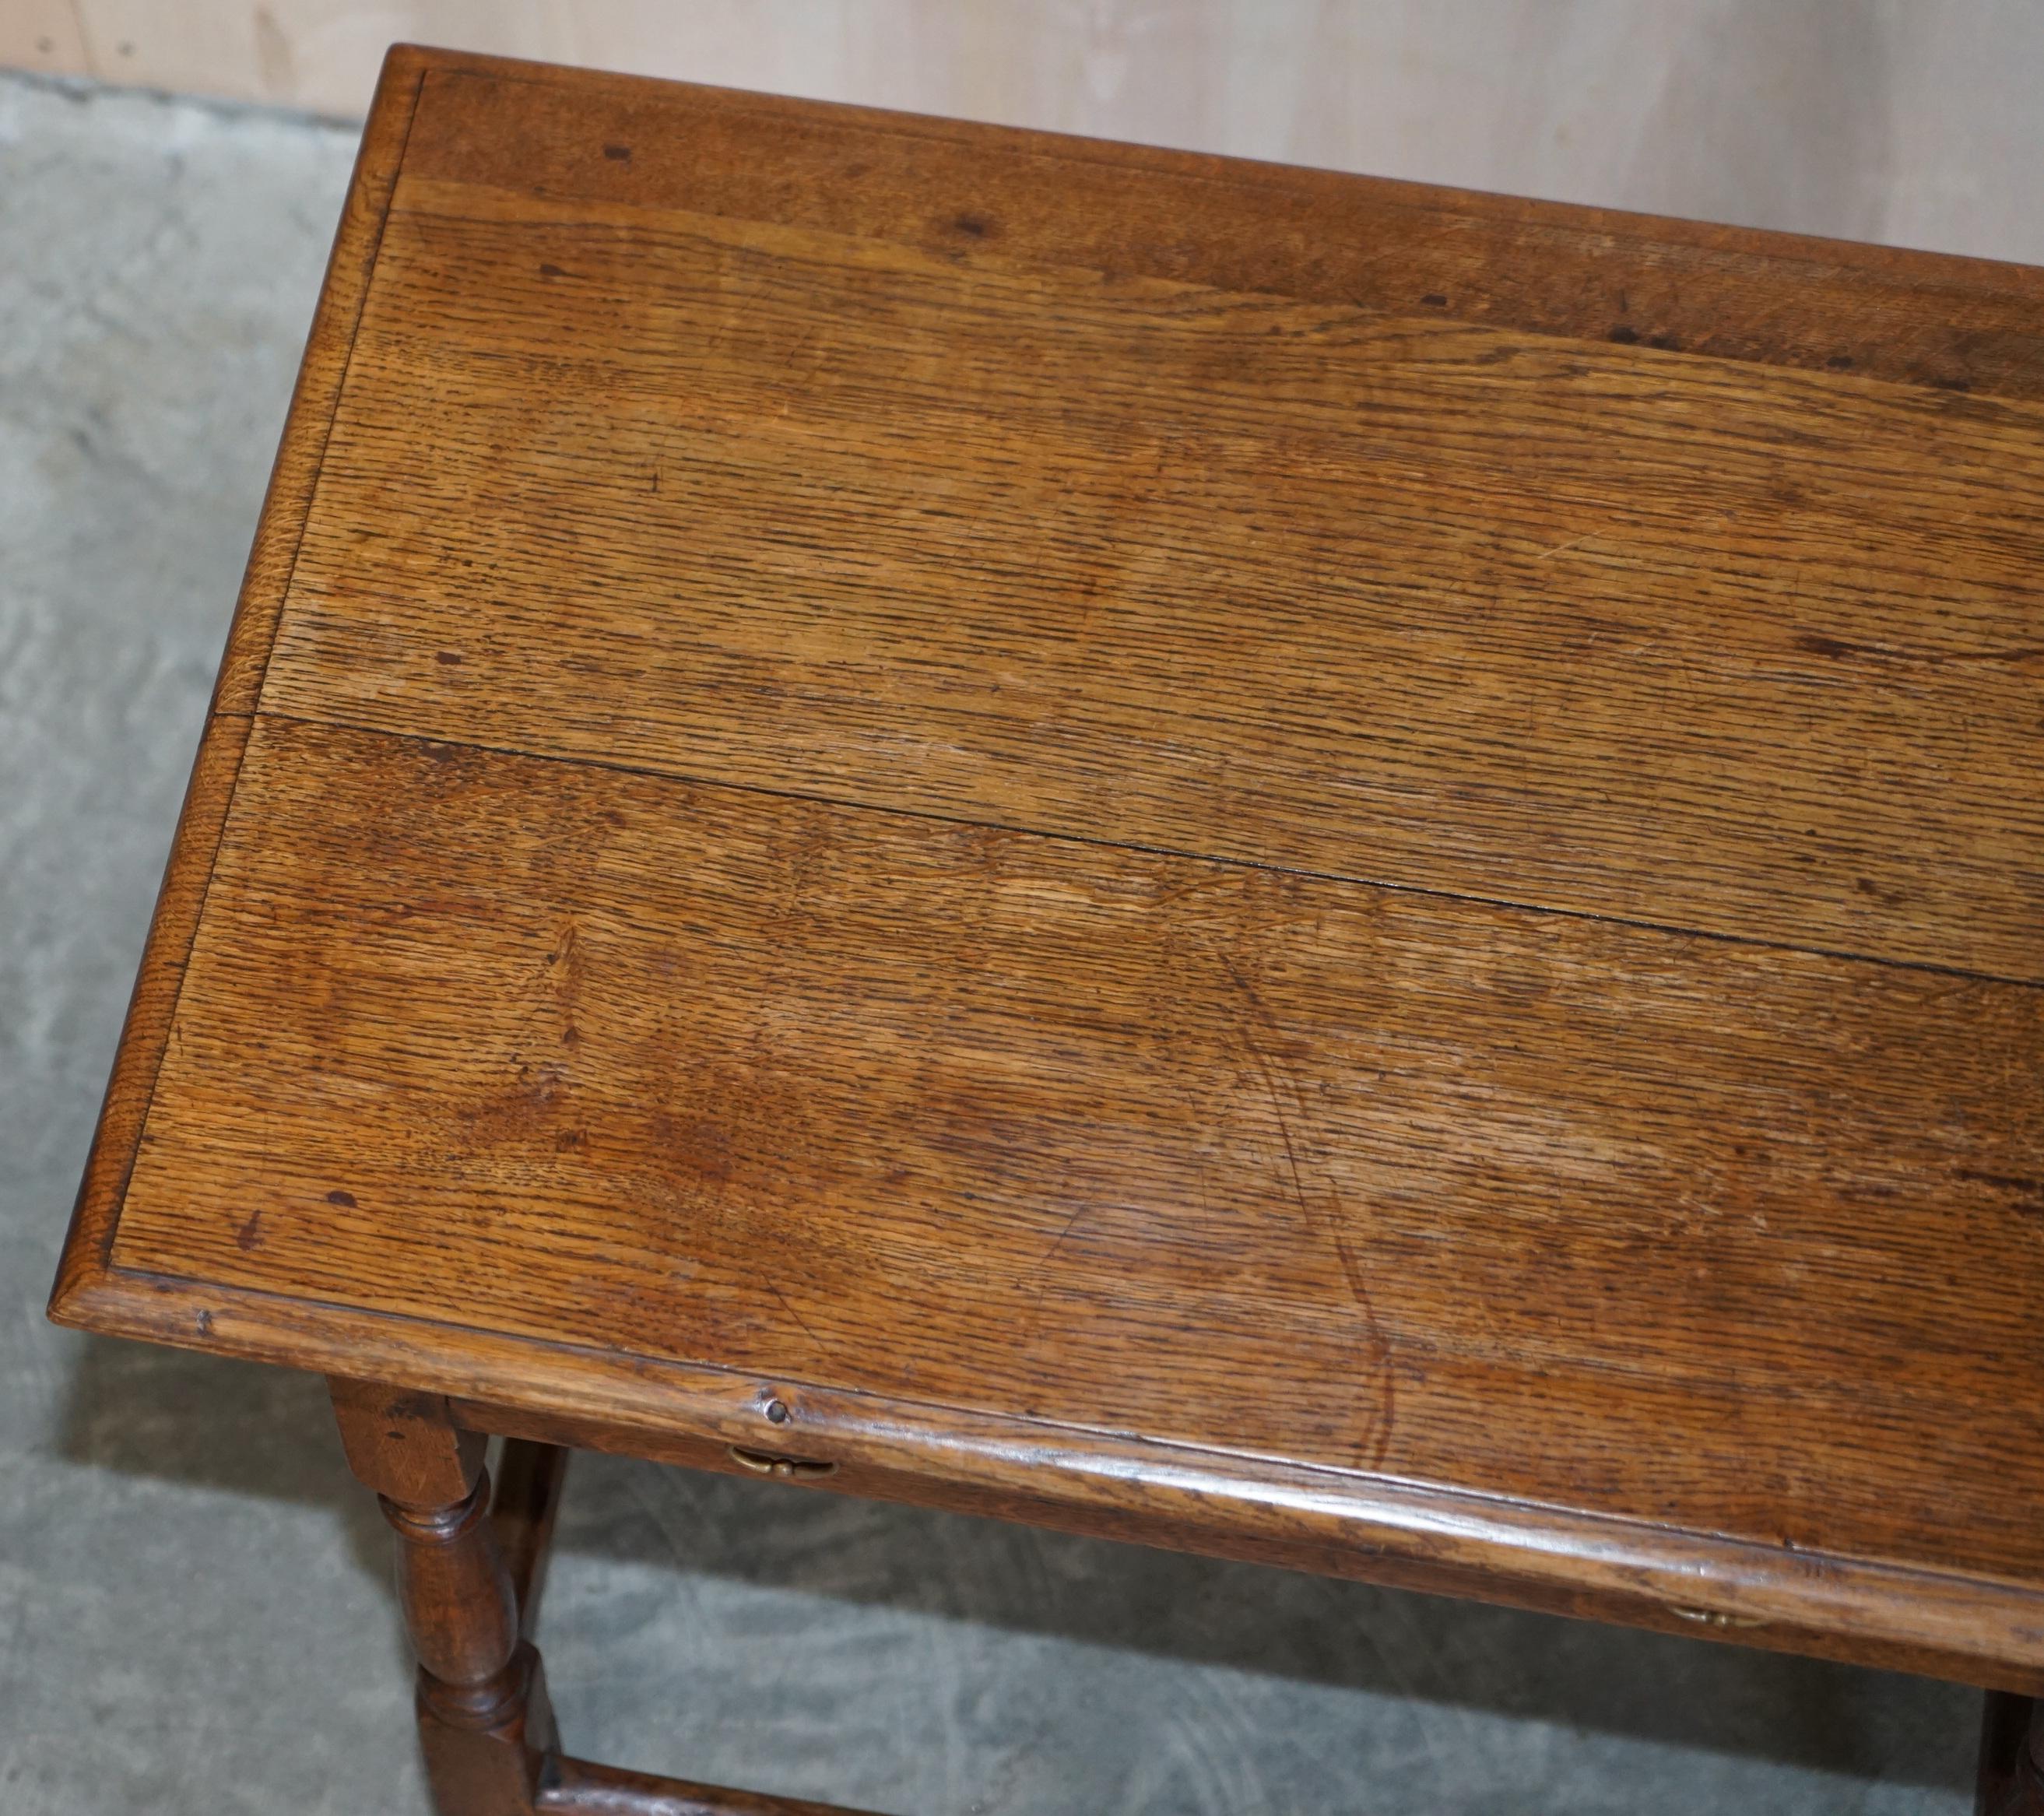 Antique circa 1700 English Oak Jointed Lowboy Side Table with Single Drawer For Sale 4